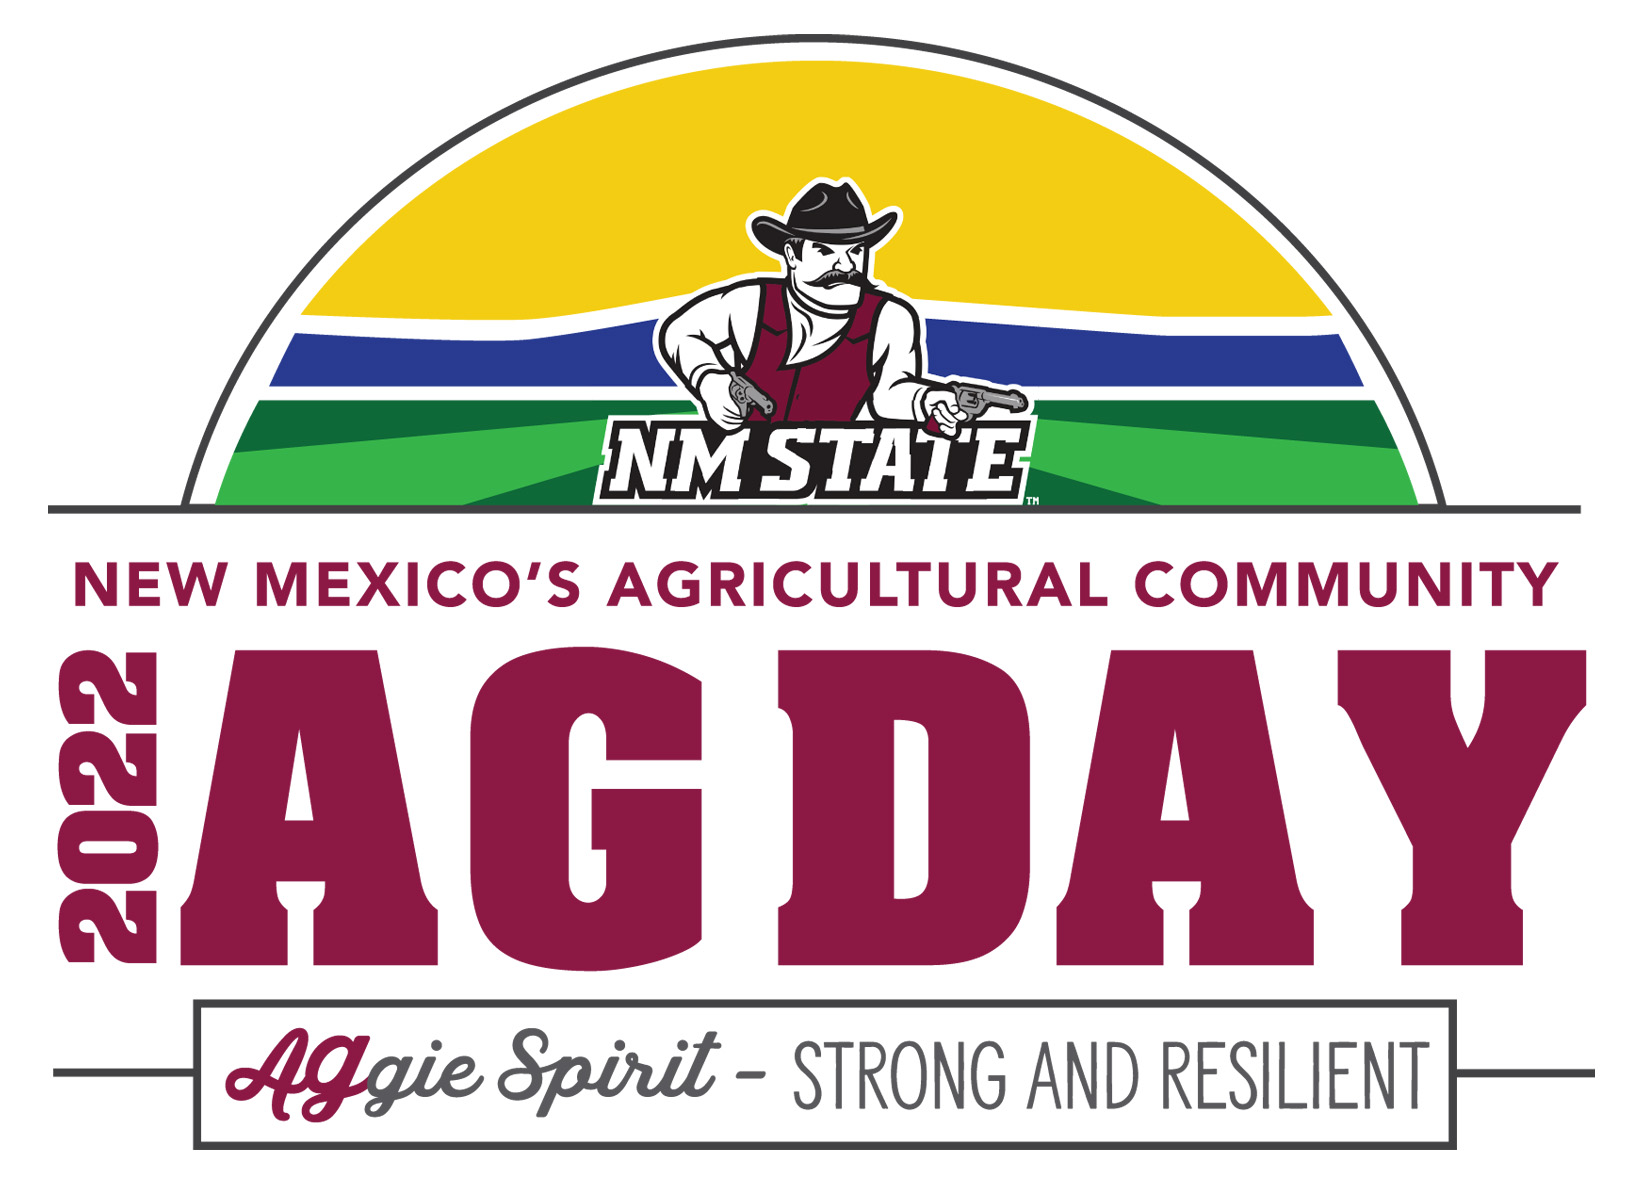 Graphic with a cowboy mascot holding a gun in each hand, with a black cowboy hat, black mustache and crimson vest, leaning over the words NM STATE in all caps, white font, black outline. Behind the cowboy is a half-circle with yellow at the top, blue in the center and green at the bottom. Under the mascot are the words New Mexico’s Agricultural Community, 2022 AG DAY in crimson font. At bottom are the words Aggie Spirit – Strong and Resilient, surrounded by a gray box.